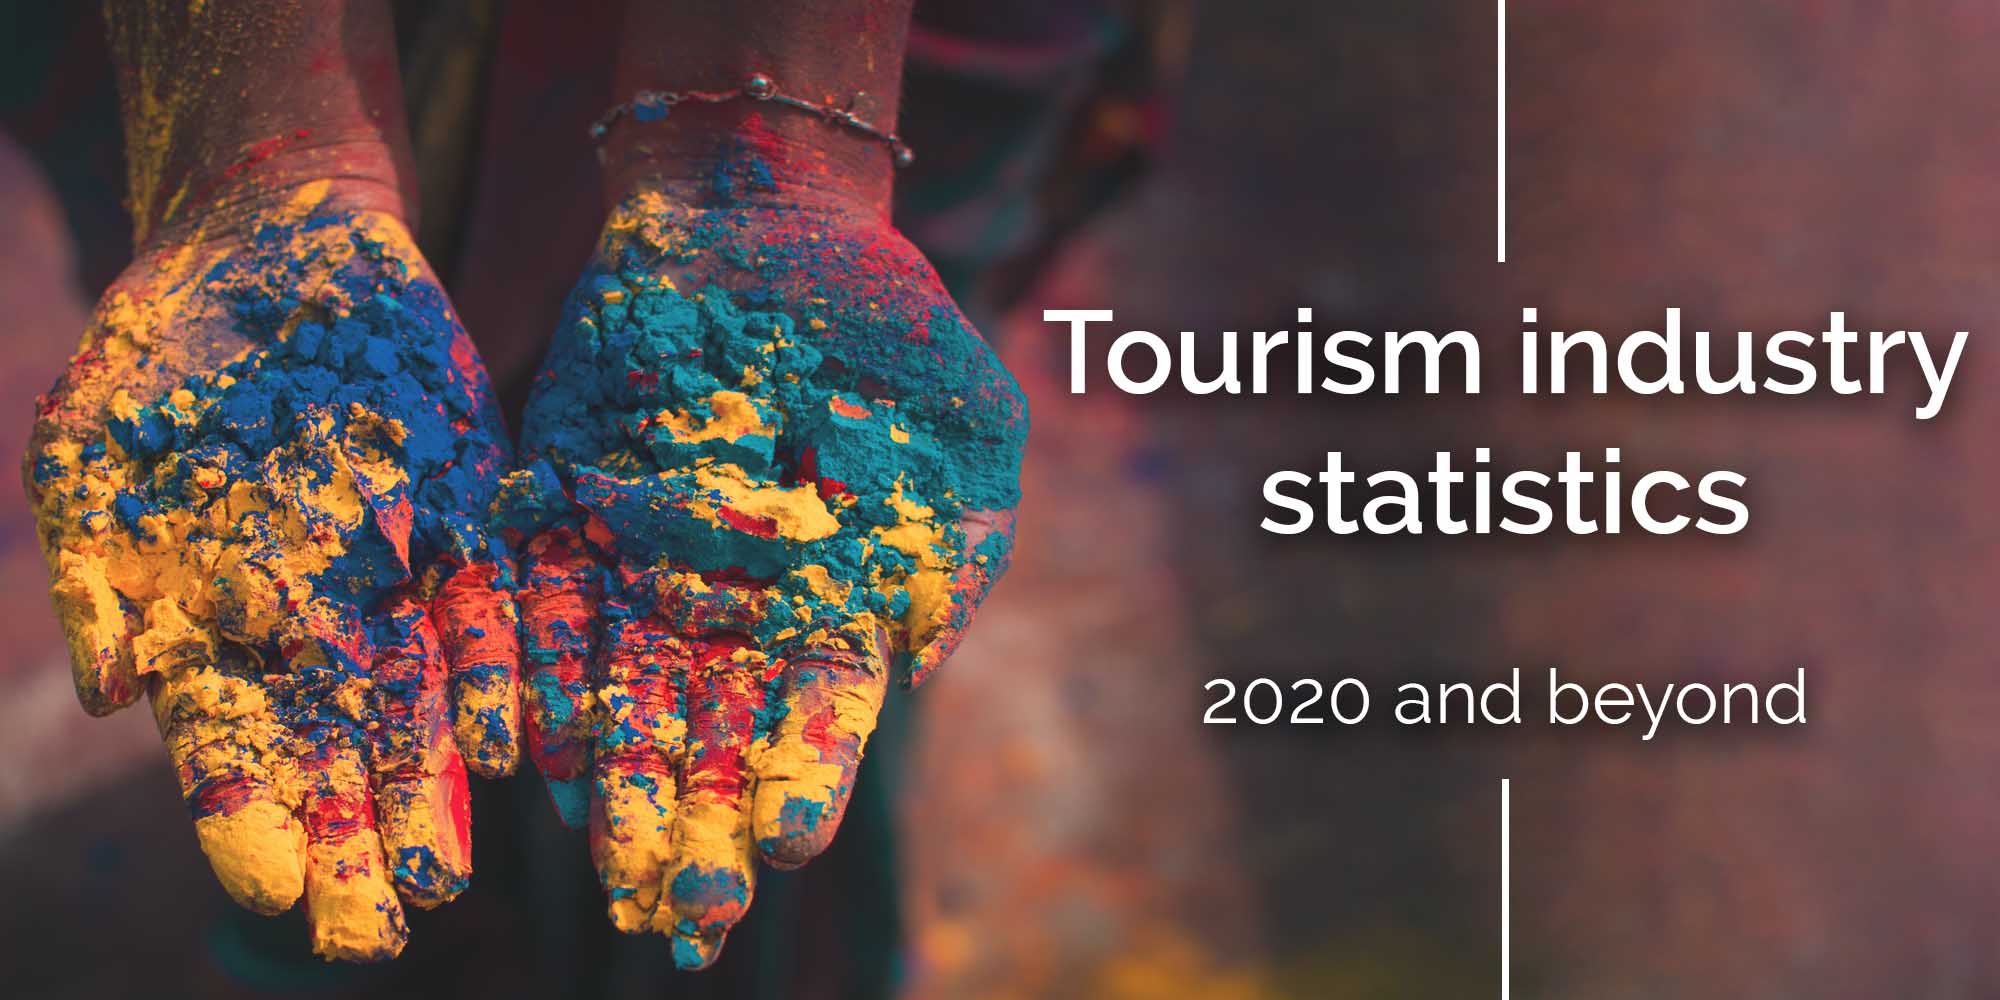 Tourism industry statistics for 2020 and beyond